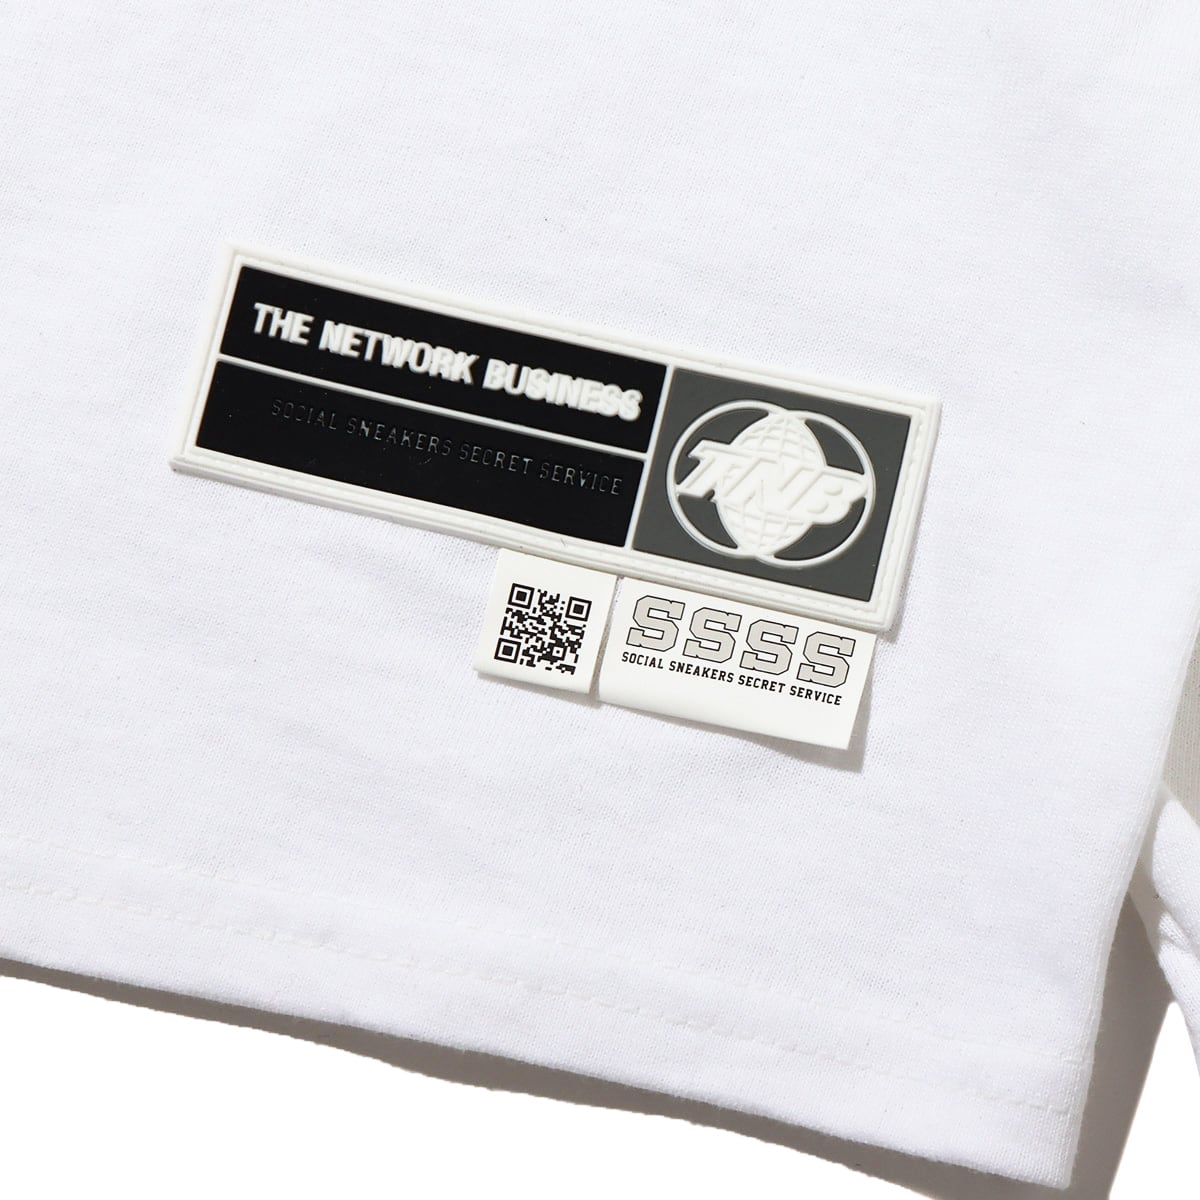 THE NETWORK BUSINESS × BREX WING FOOT L/S TEE WHITE 23SP-S